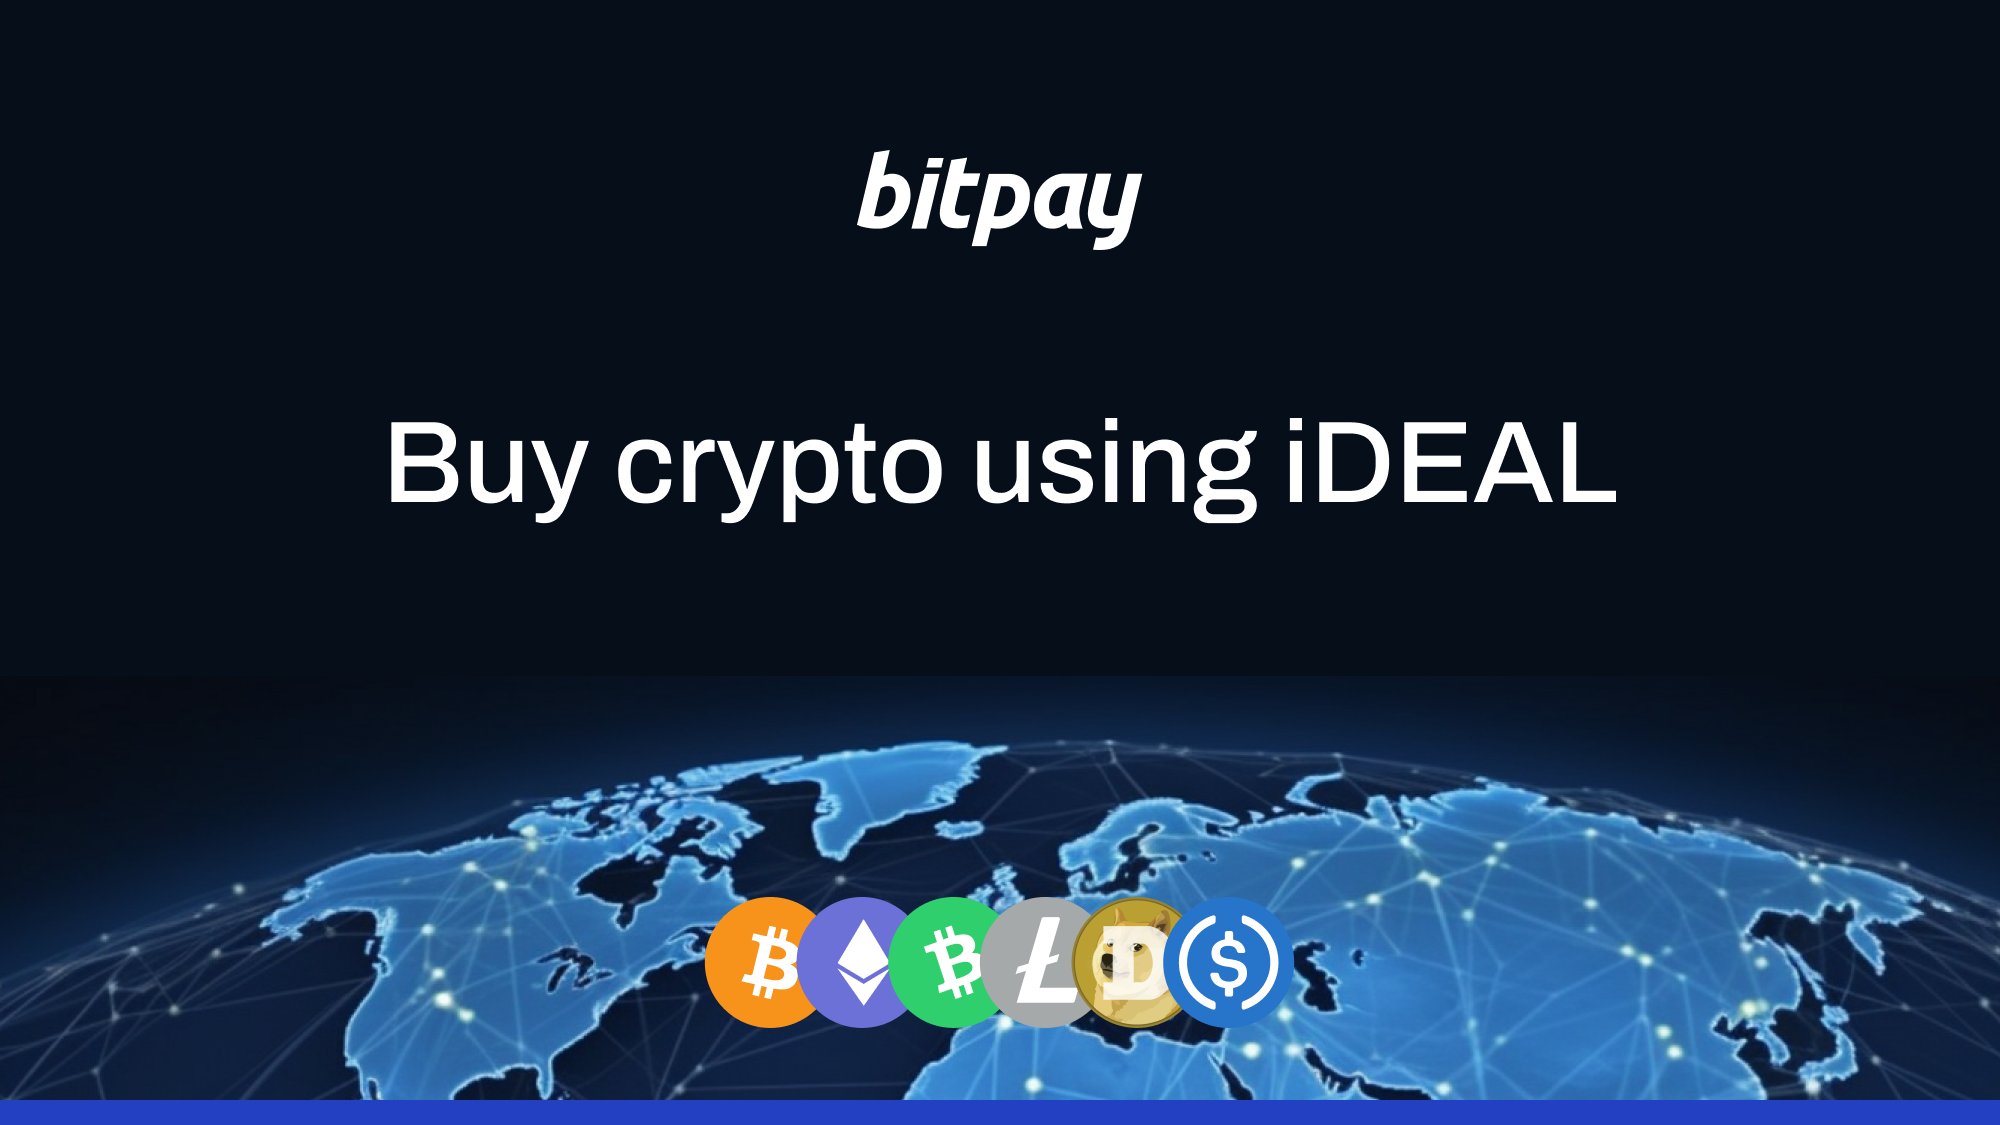 How to Buy Crypto with iDEAL in the Netherlands via BitPay